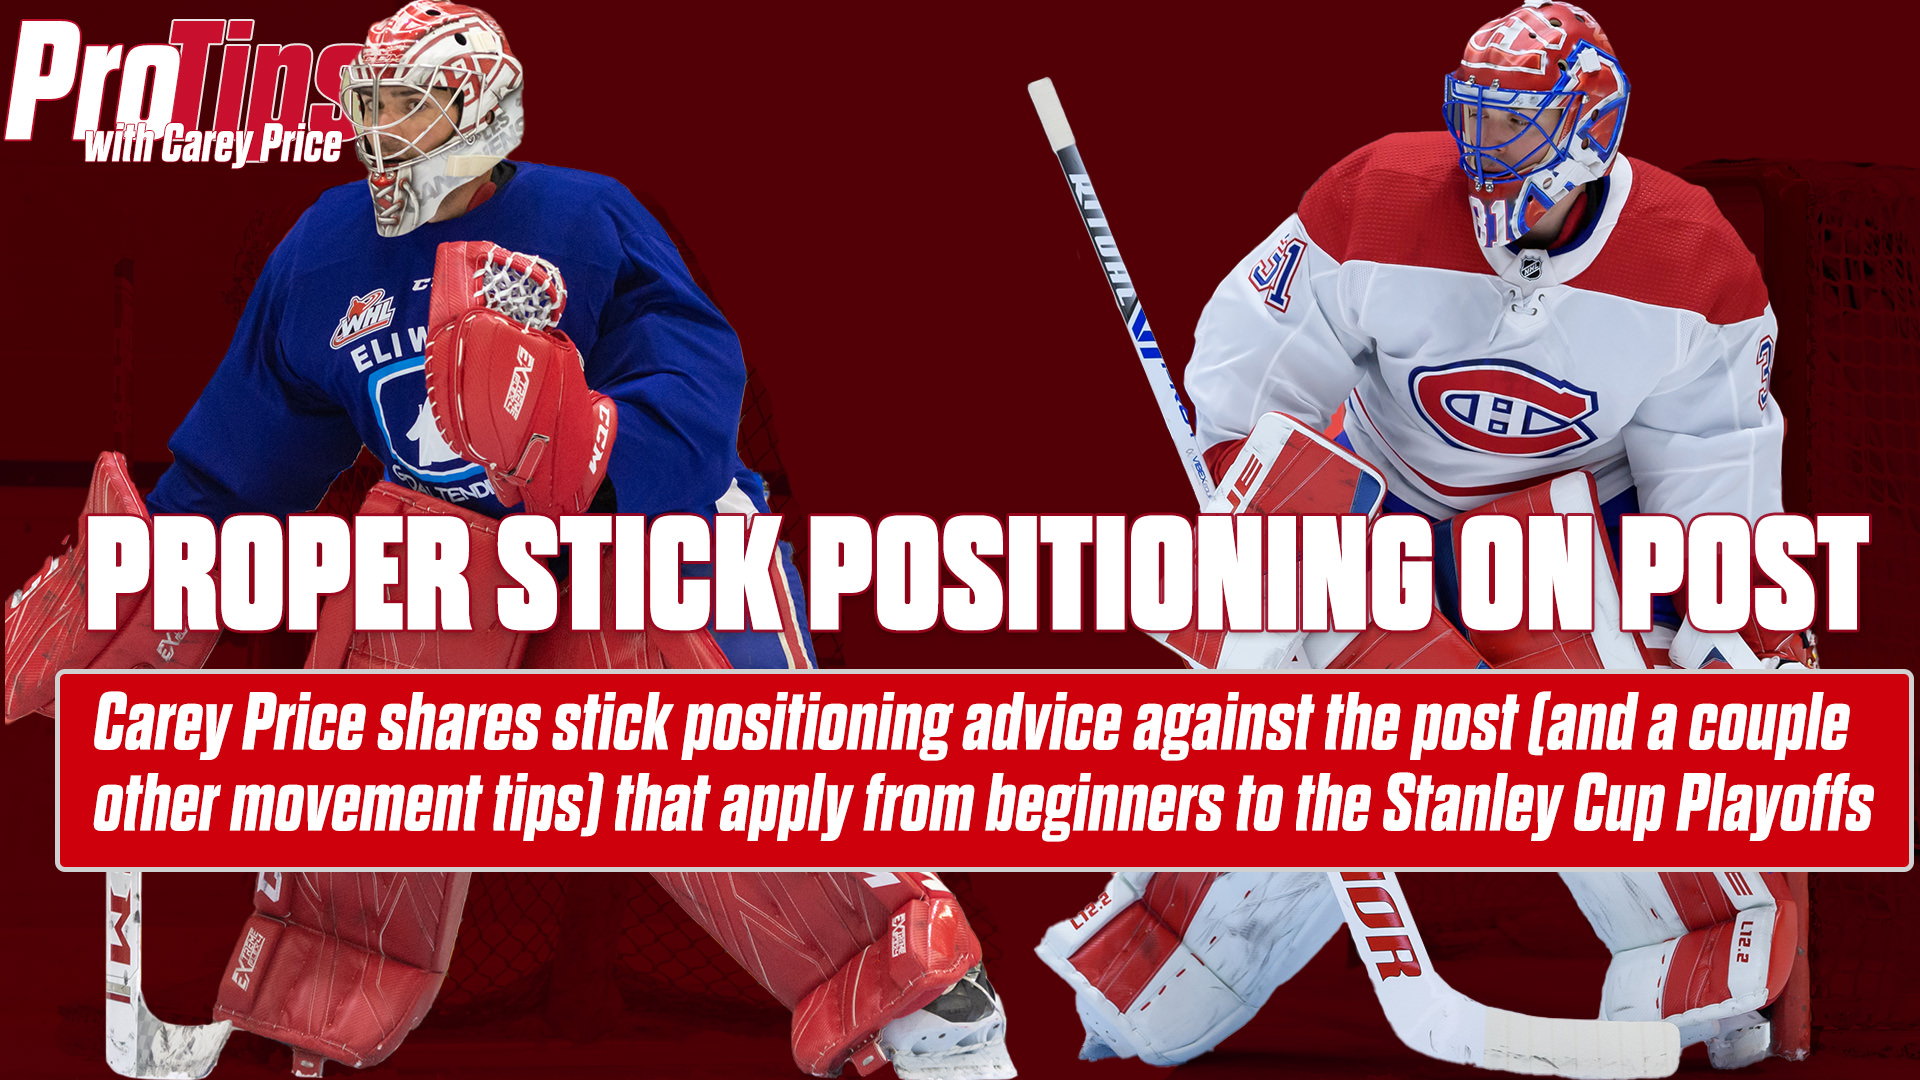 Pro Tips with Carey Price: Proper Stick Positioning on Post